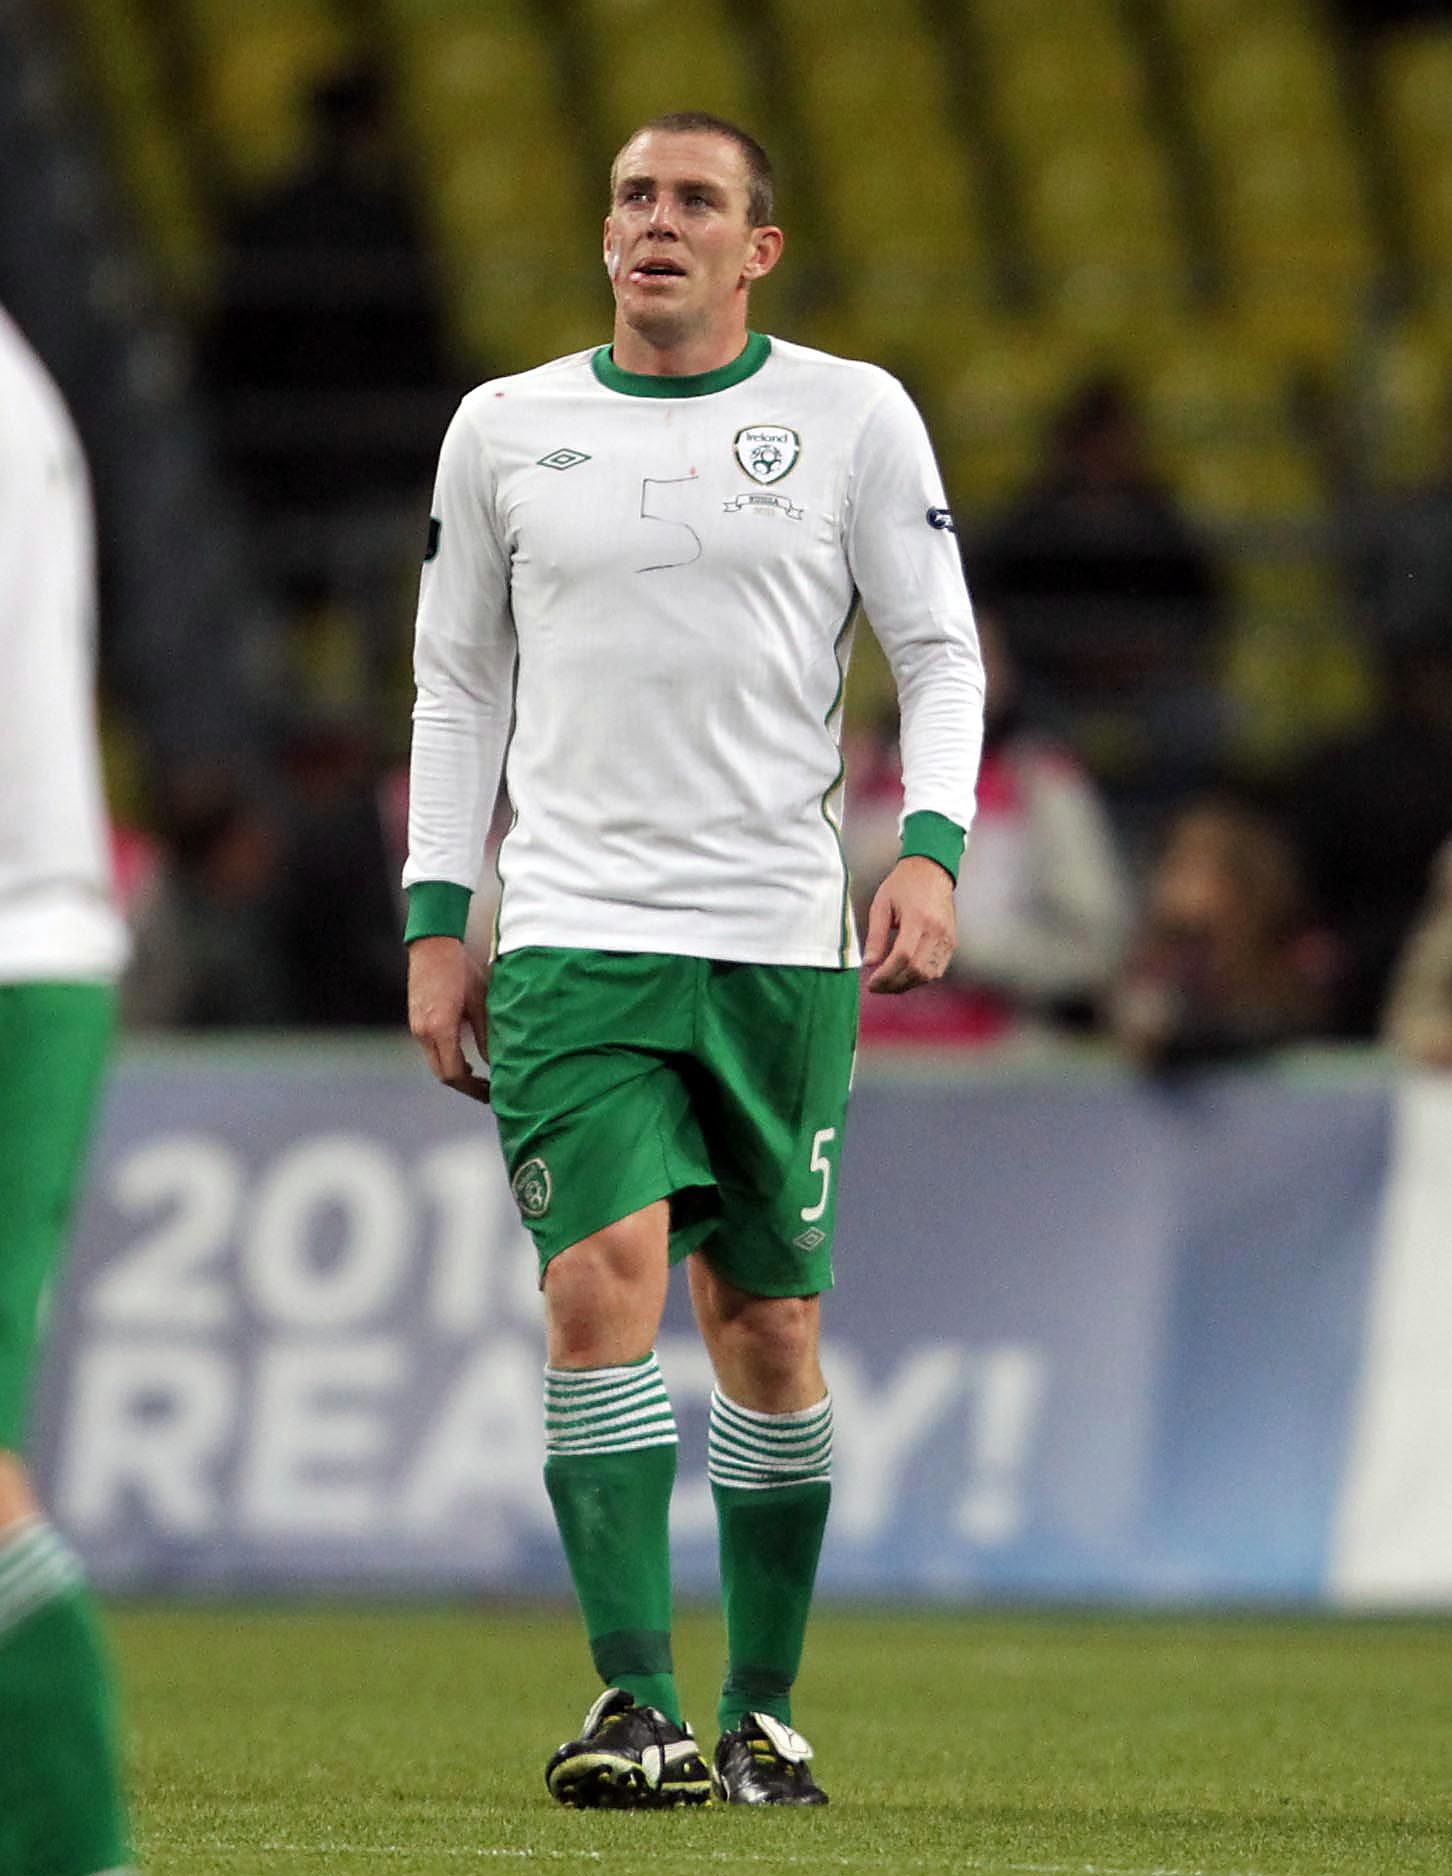 UEFA Euro 2012 Qualifier 6/9/2011 Russia vs Republic of Ireland Ireland's Richard Dunne with the number 5 written on his jersey Mandatory Credit ©INPHO/Donall Farmer